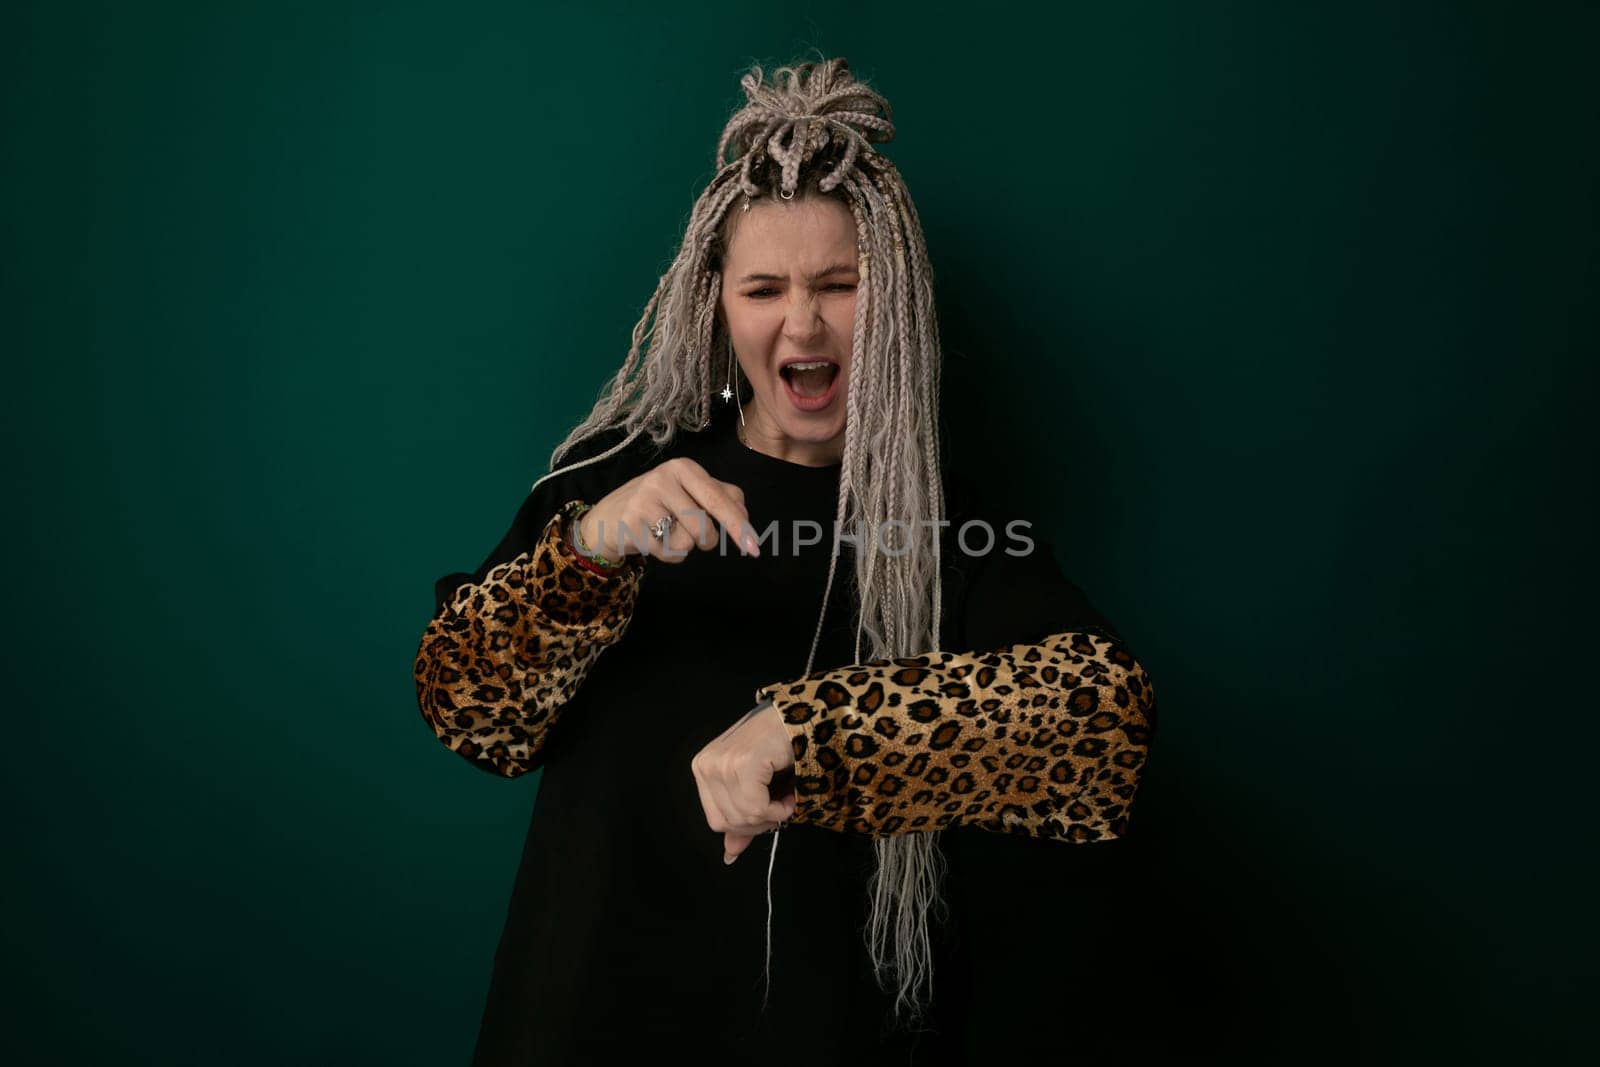 A woman with long flowing hair wearing a leopard print glove, showcasing a striking contrast between her natural beauty and the wild animal-inspired accessory. The womans graceful pose accentuates the elegance and fierceness of the leopard print glove.